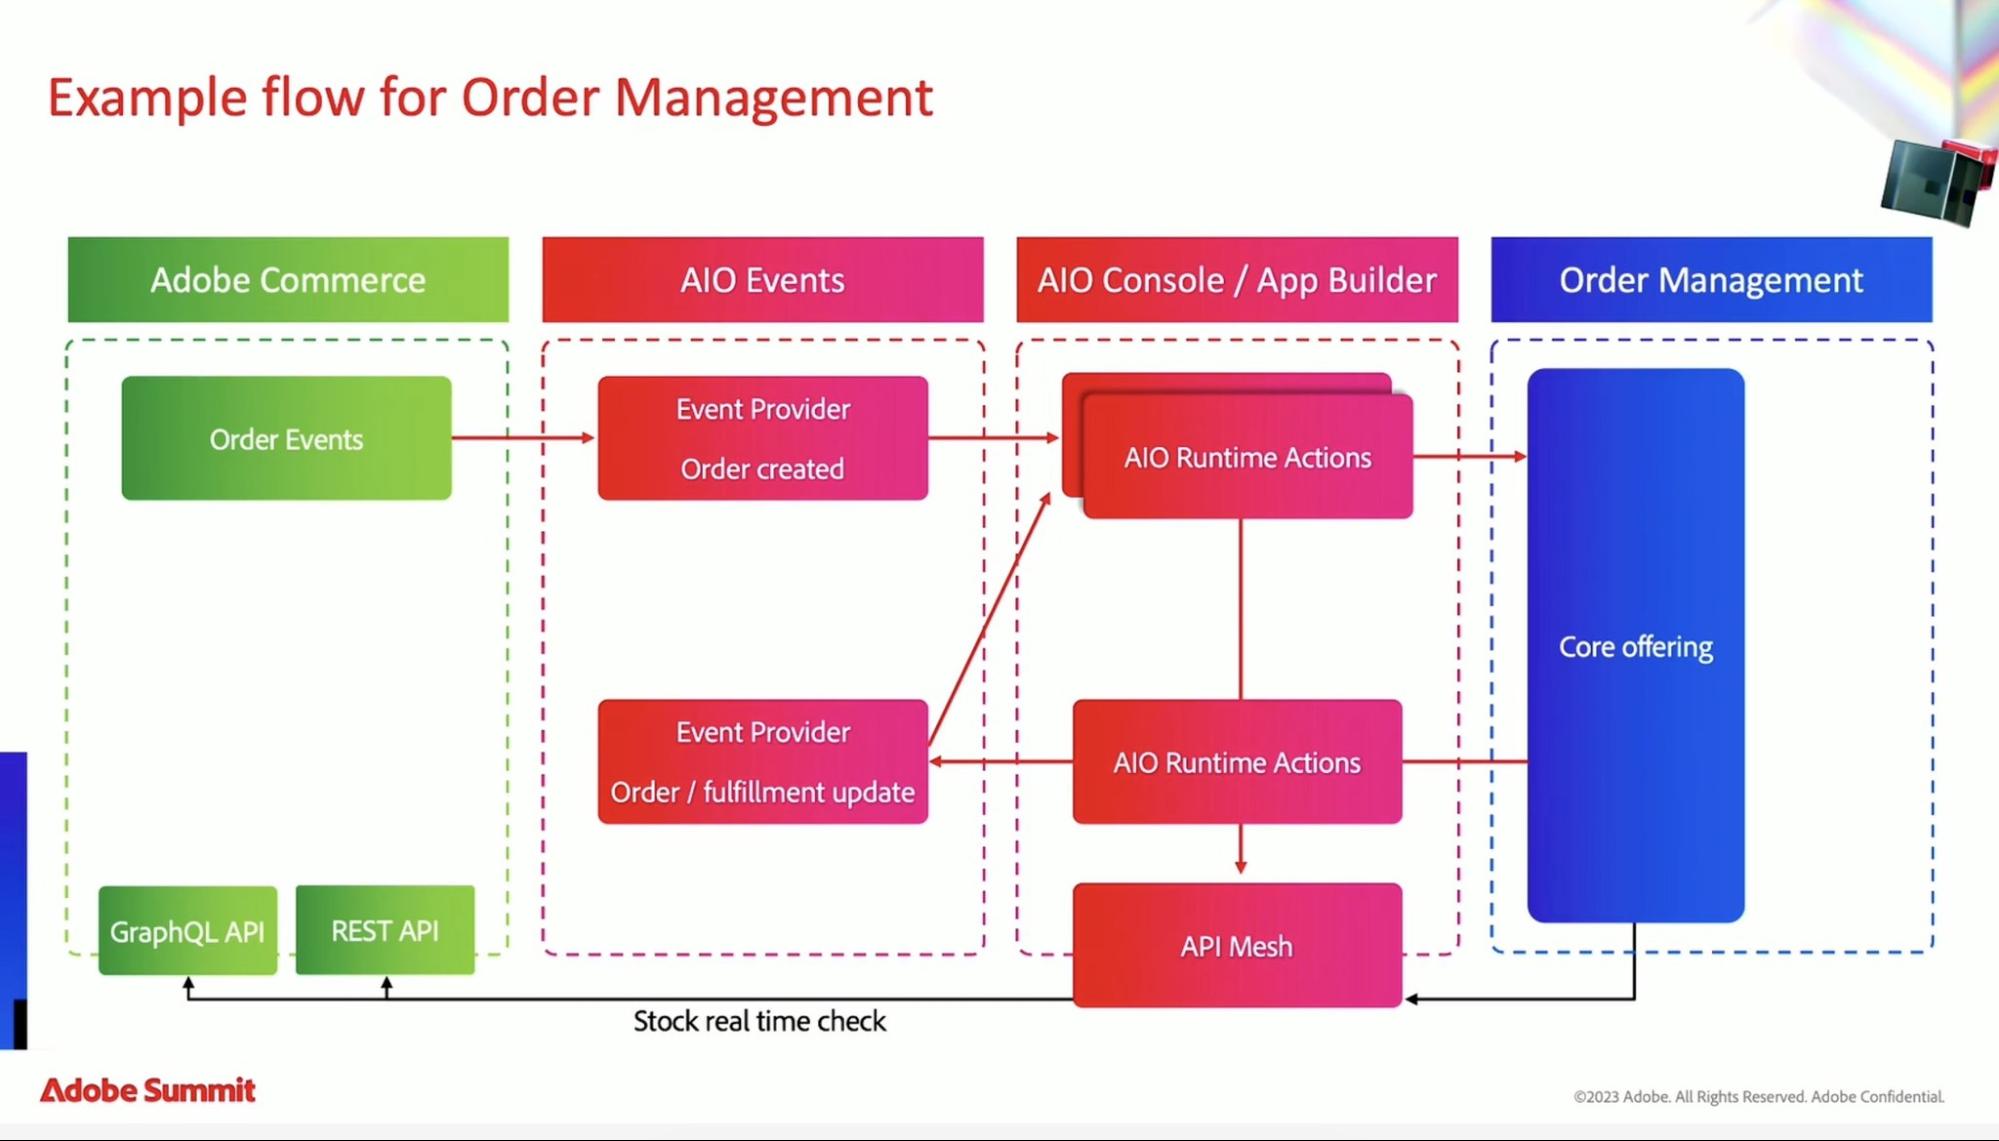 slide from Adobe Summit 2018 depicting example flow for order management